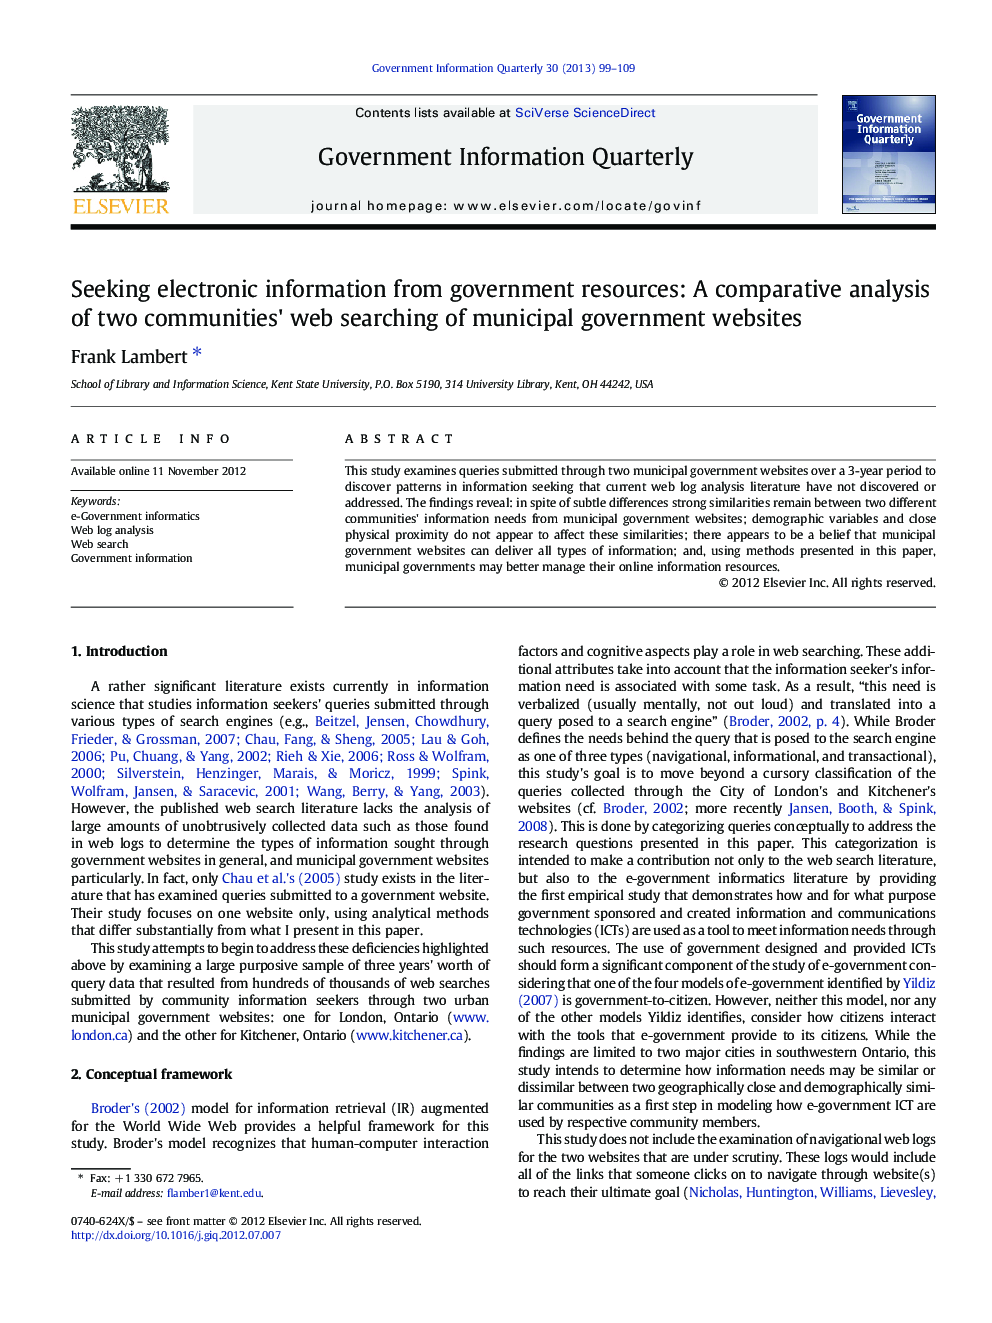 Seeking electronic information from government resources: A comparative analysis of two communities' web searching of municipal government websites